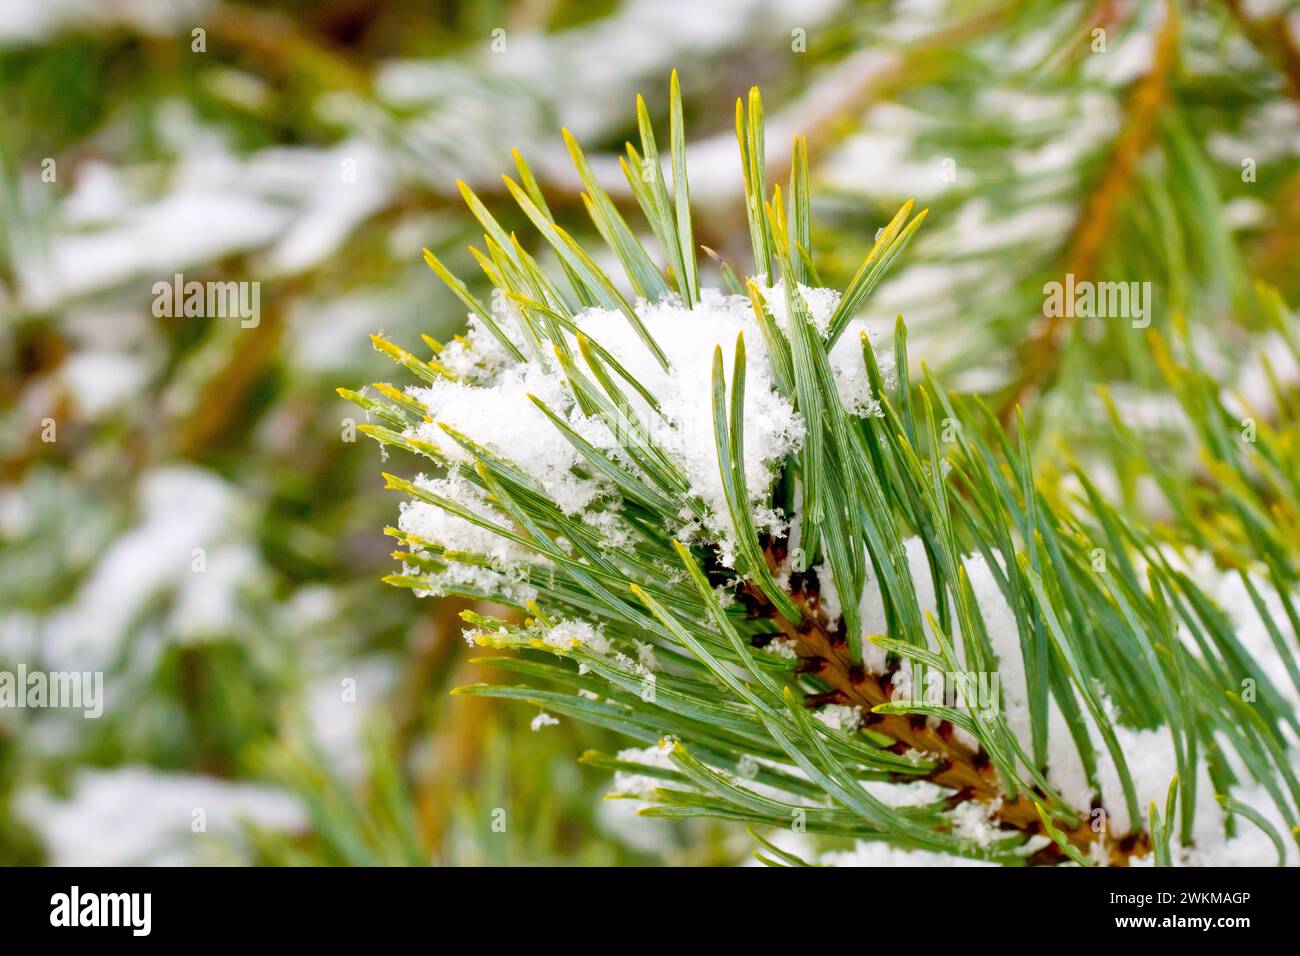 Scot's Pine (pinus sylvestris), close up of a branch of the tree showing the green needles covered in snow and isolated from the background. Stock Photo